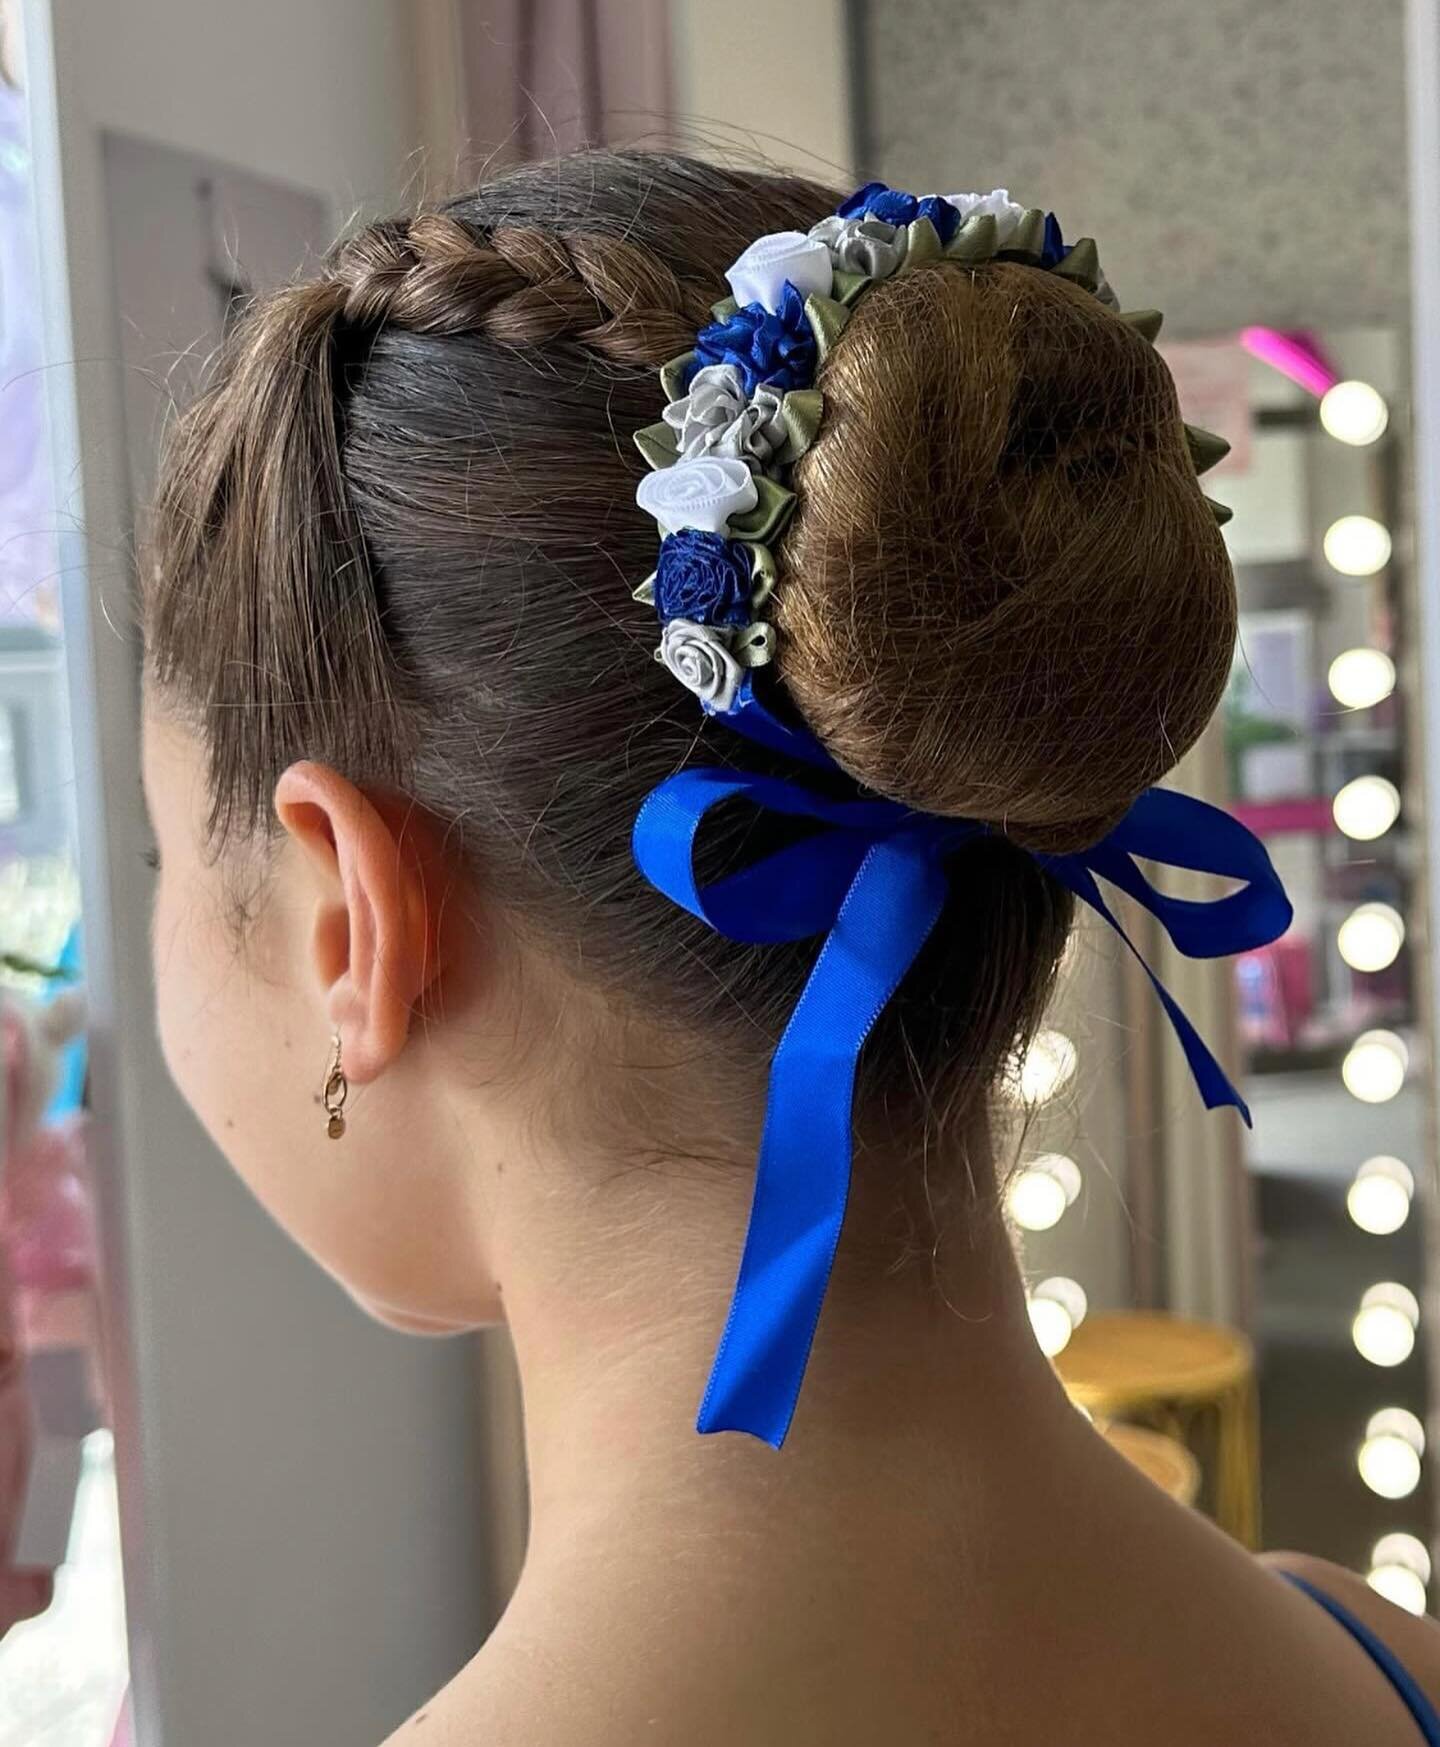 Gorgeous Kate and her beautiful @ballerina.bun.blossoms 😍 Perfect color to match our Ballet uniform 💙 #madancers #charlysangel #goMAD #MADteam #passion #dance #strength #power #unity #lyrical #contemporary #hope #teamworkmakesthedreamwork #dancecom